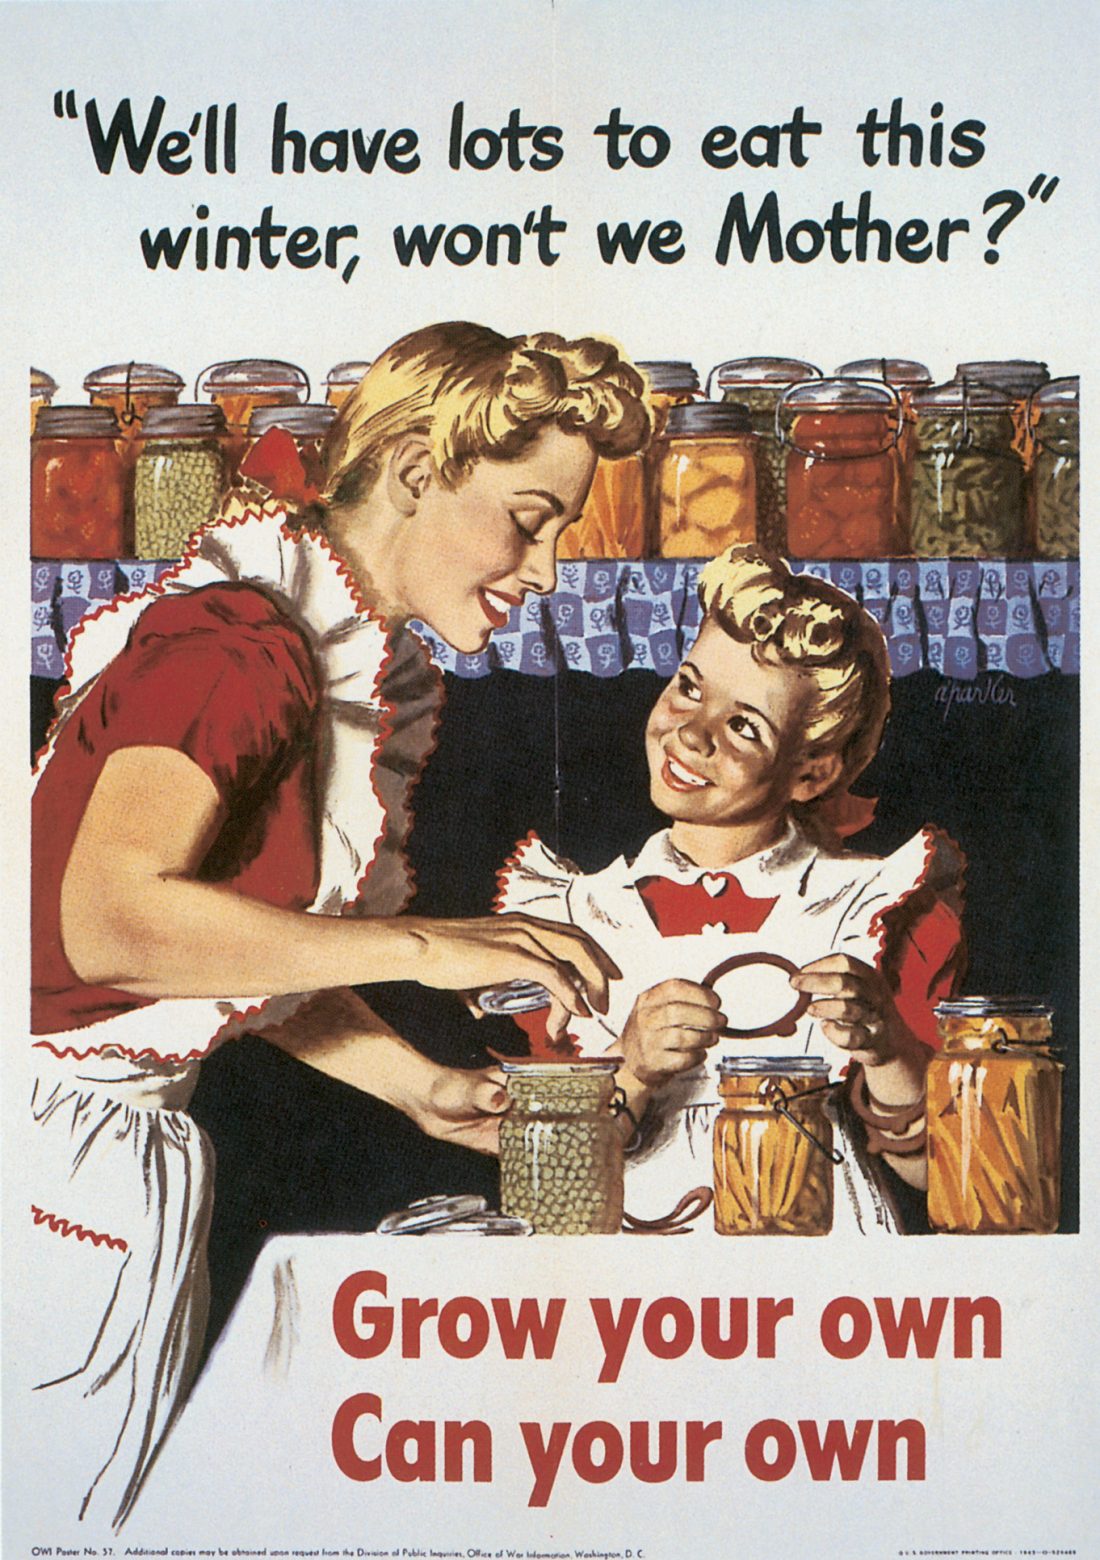 US poster promoting canning, 1943